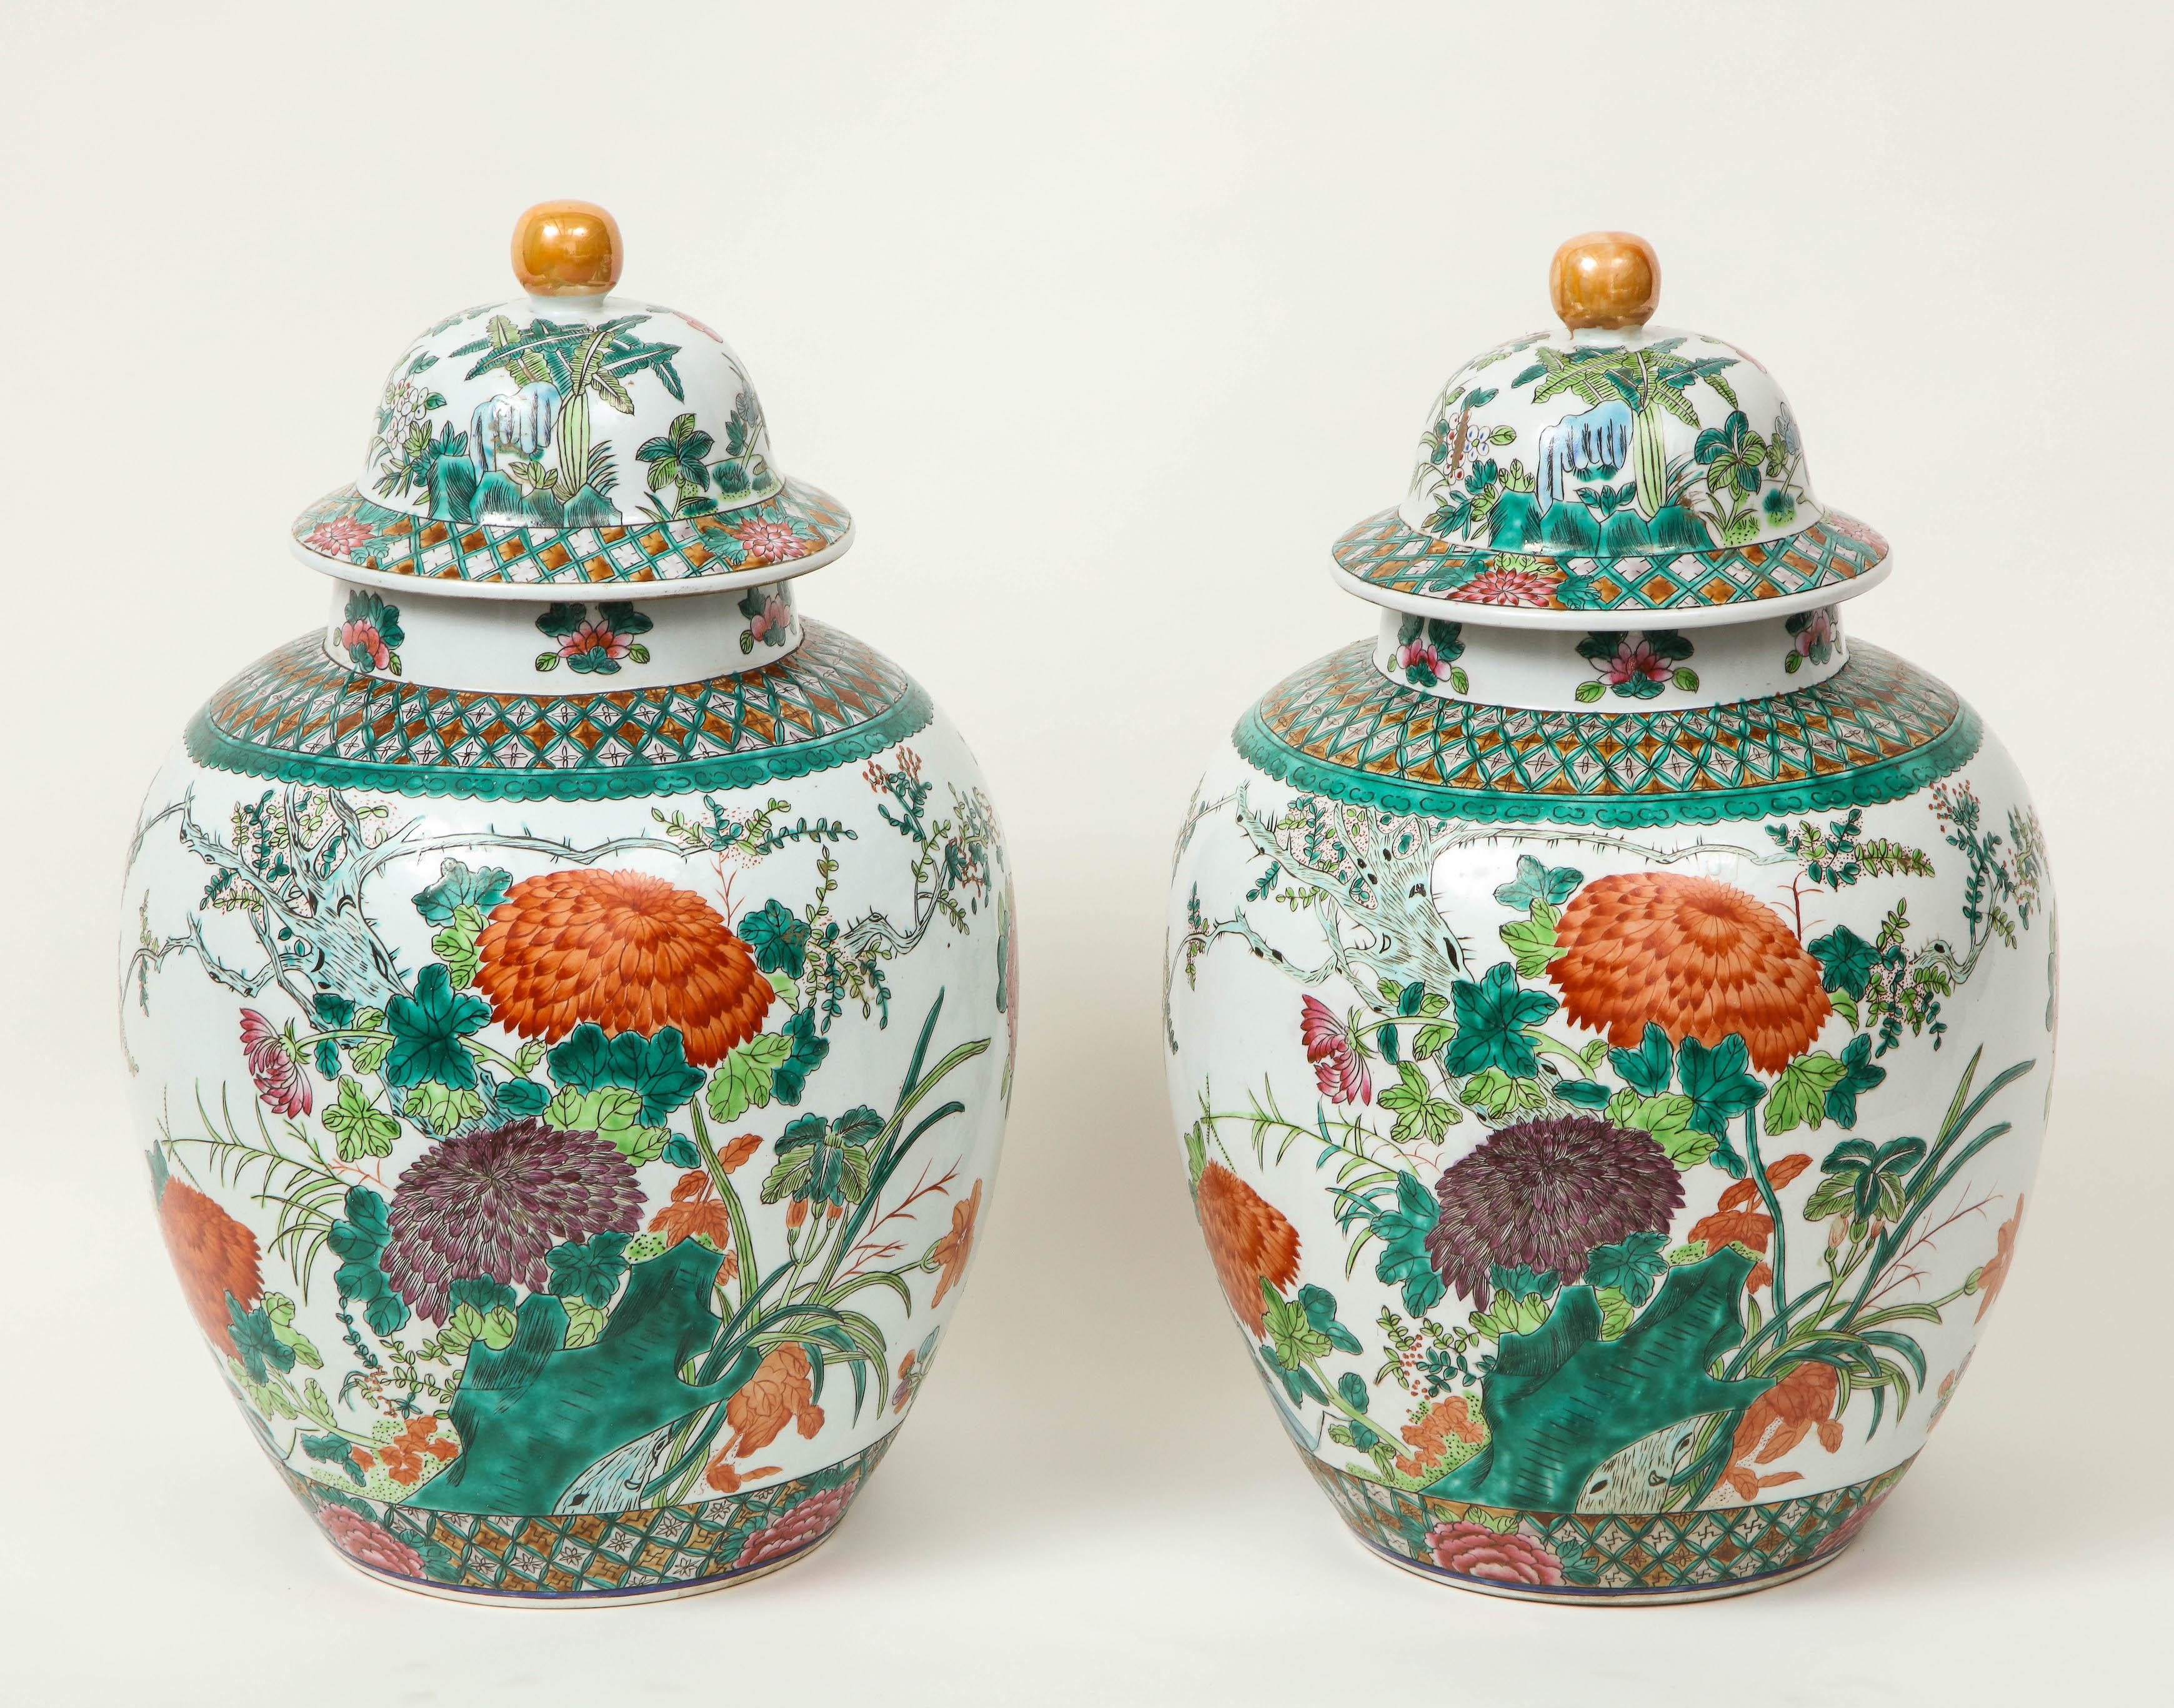 Decorated with tree peonies in full bloom in coral and aubergine. With a lid surmounted by a gilt ball finial. With mark to underside.